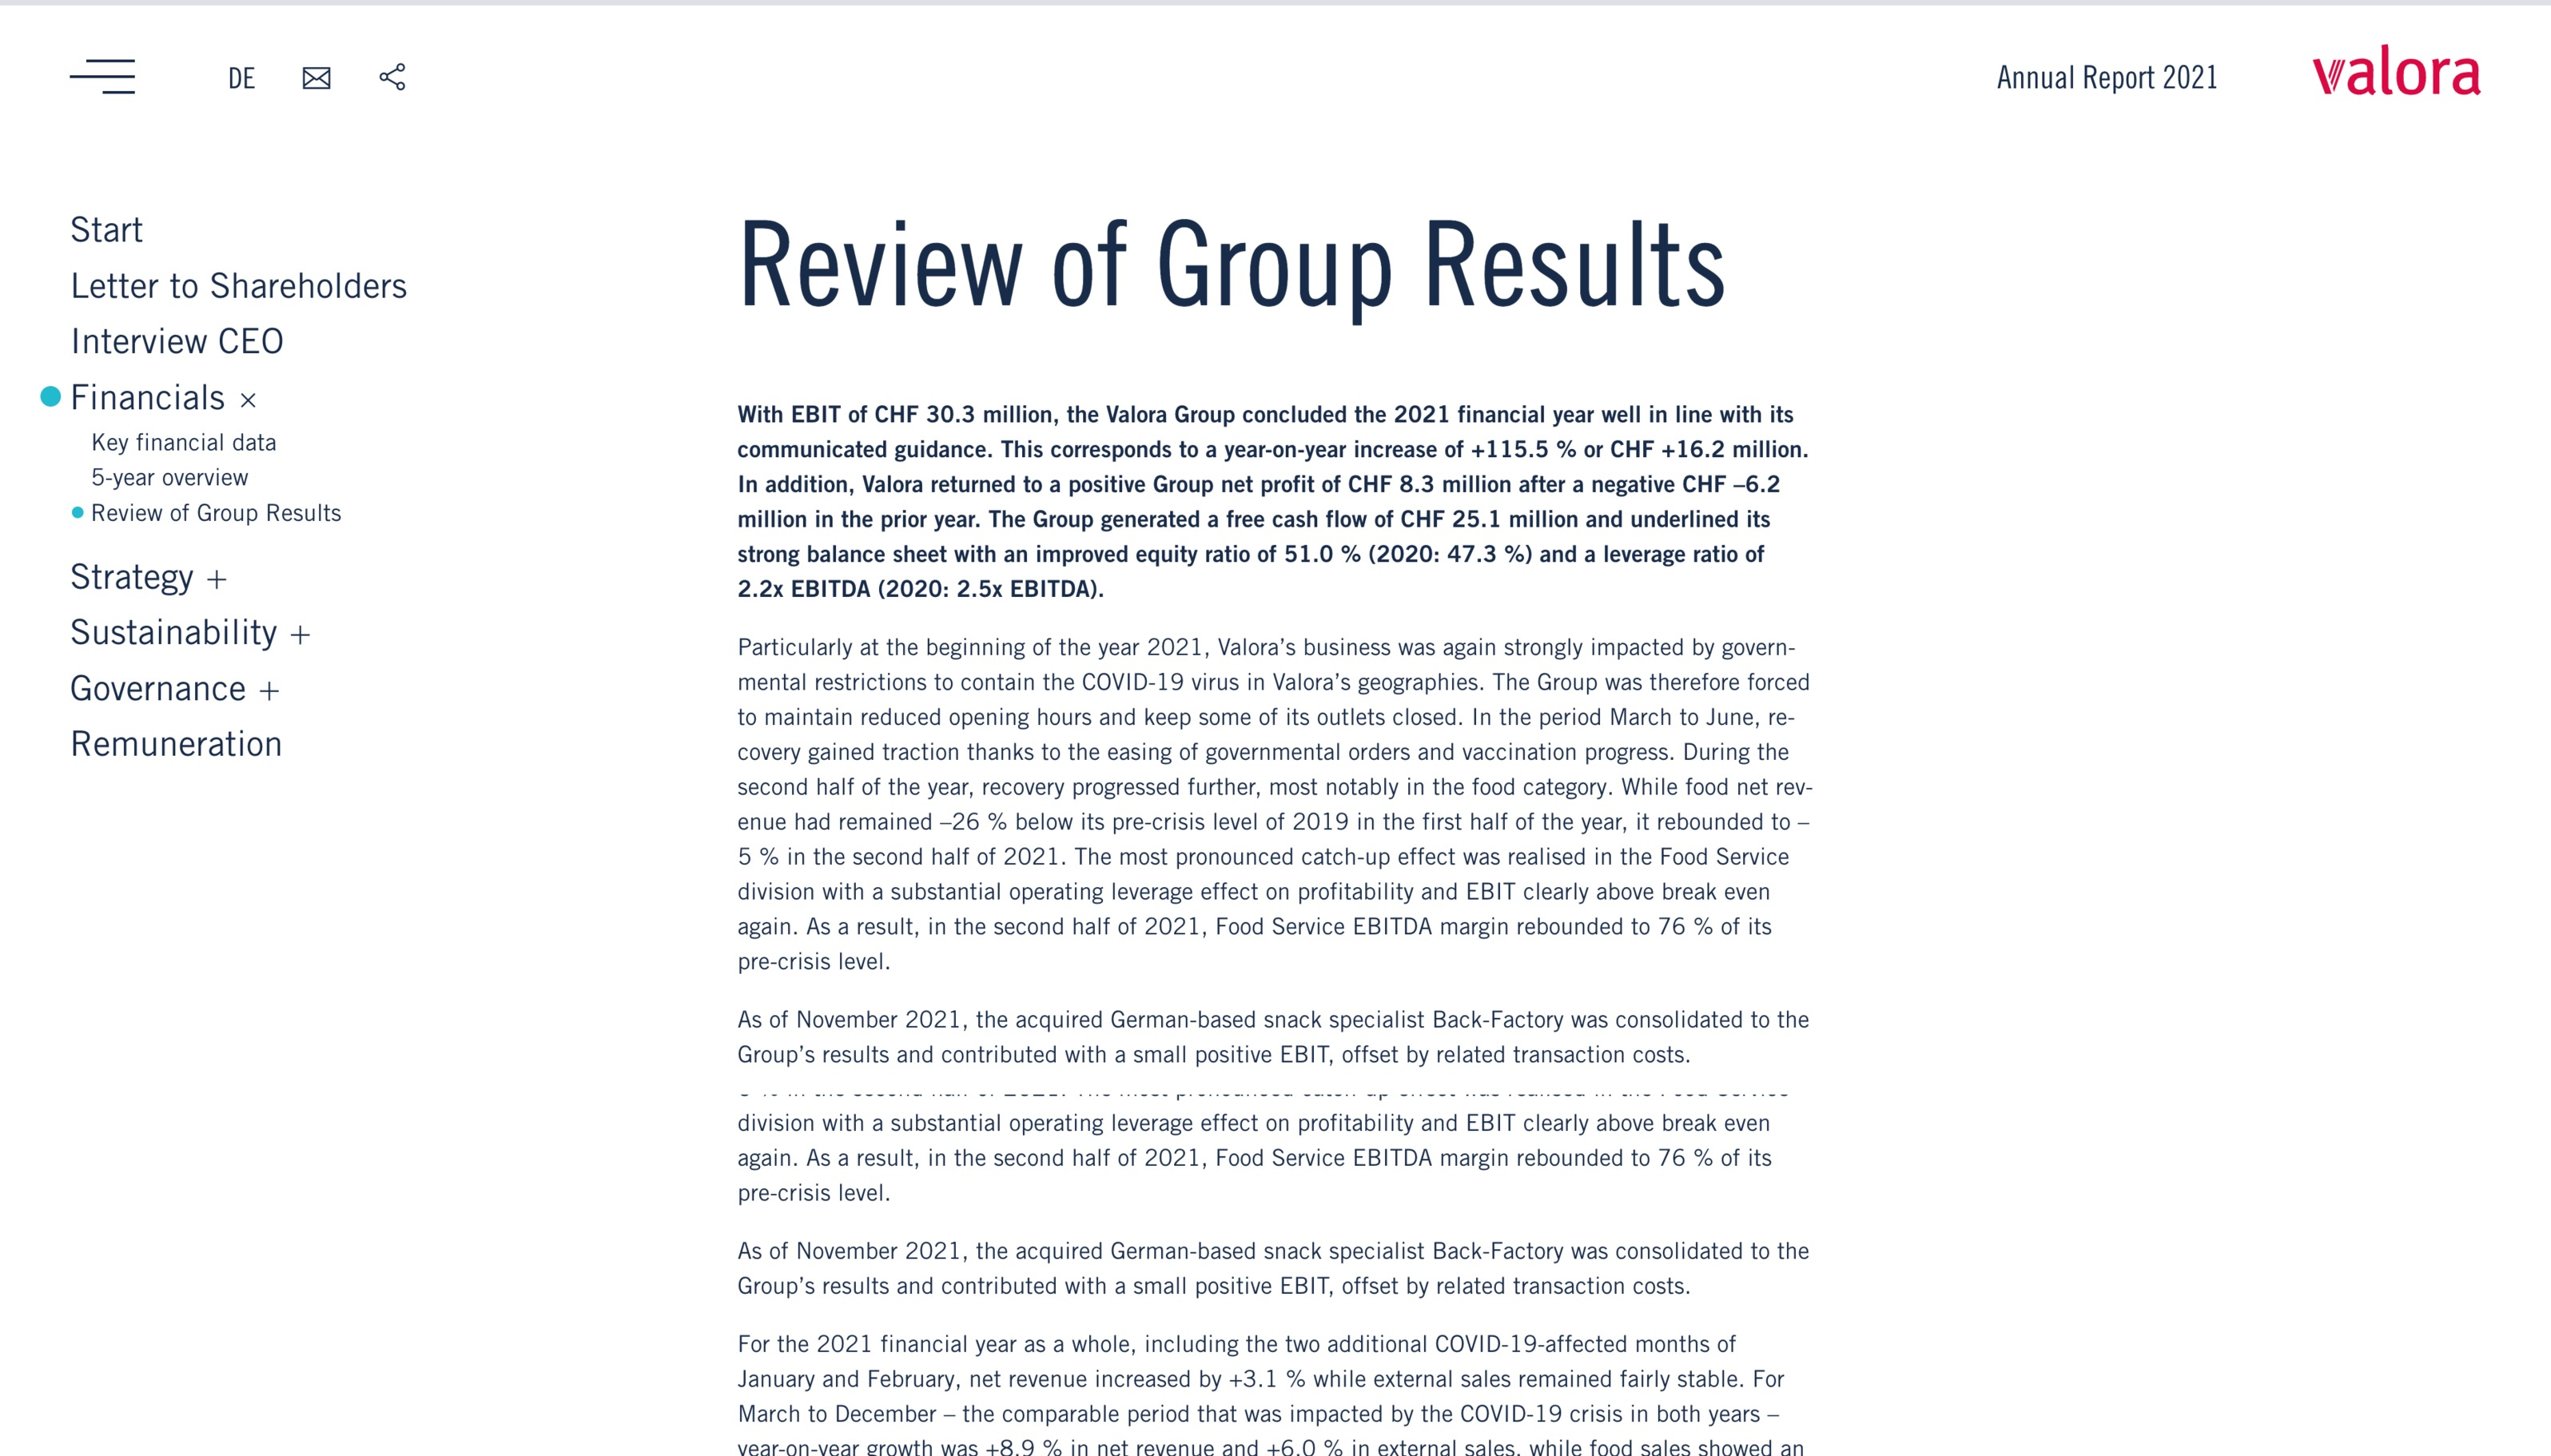 Review of Group Results — Annual Report 2021